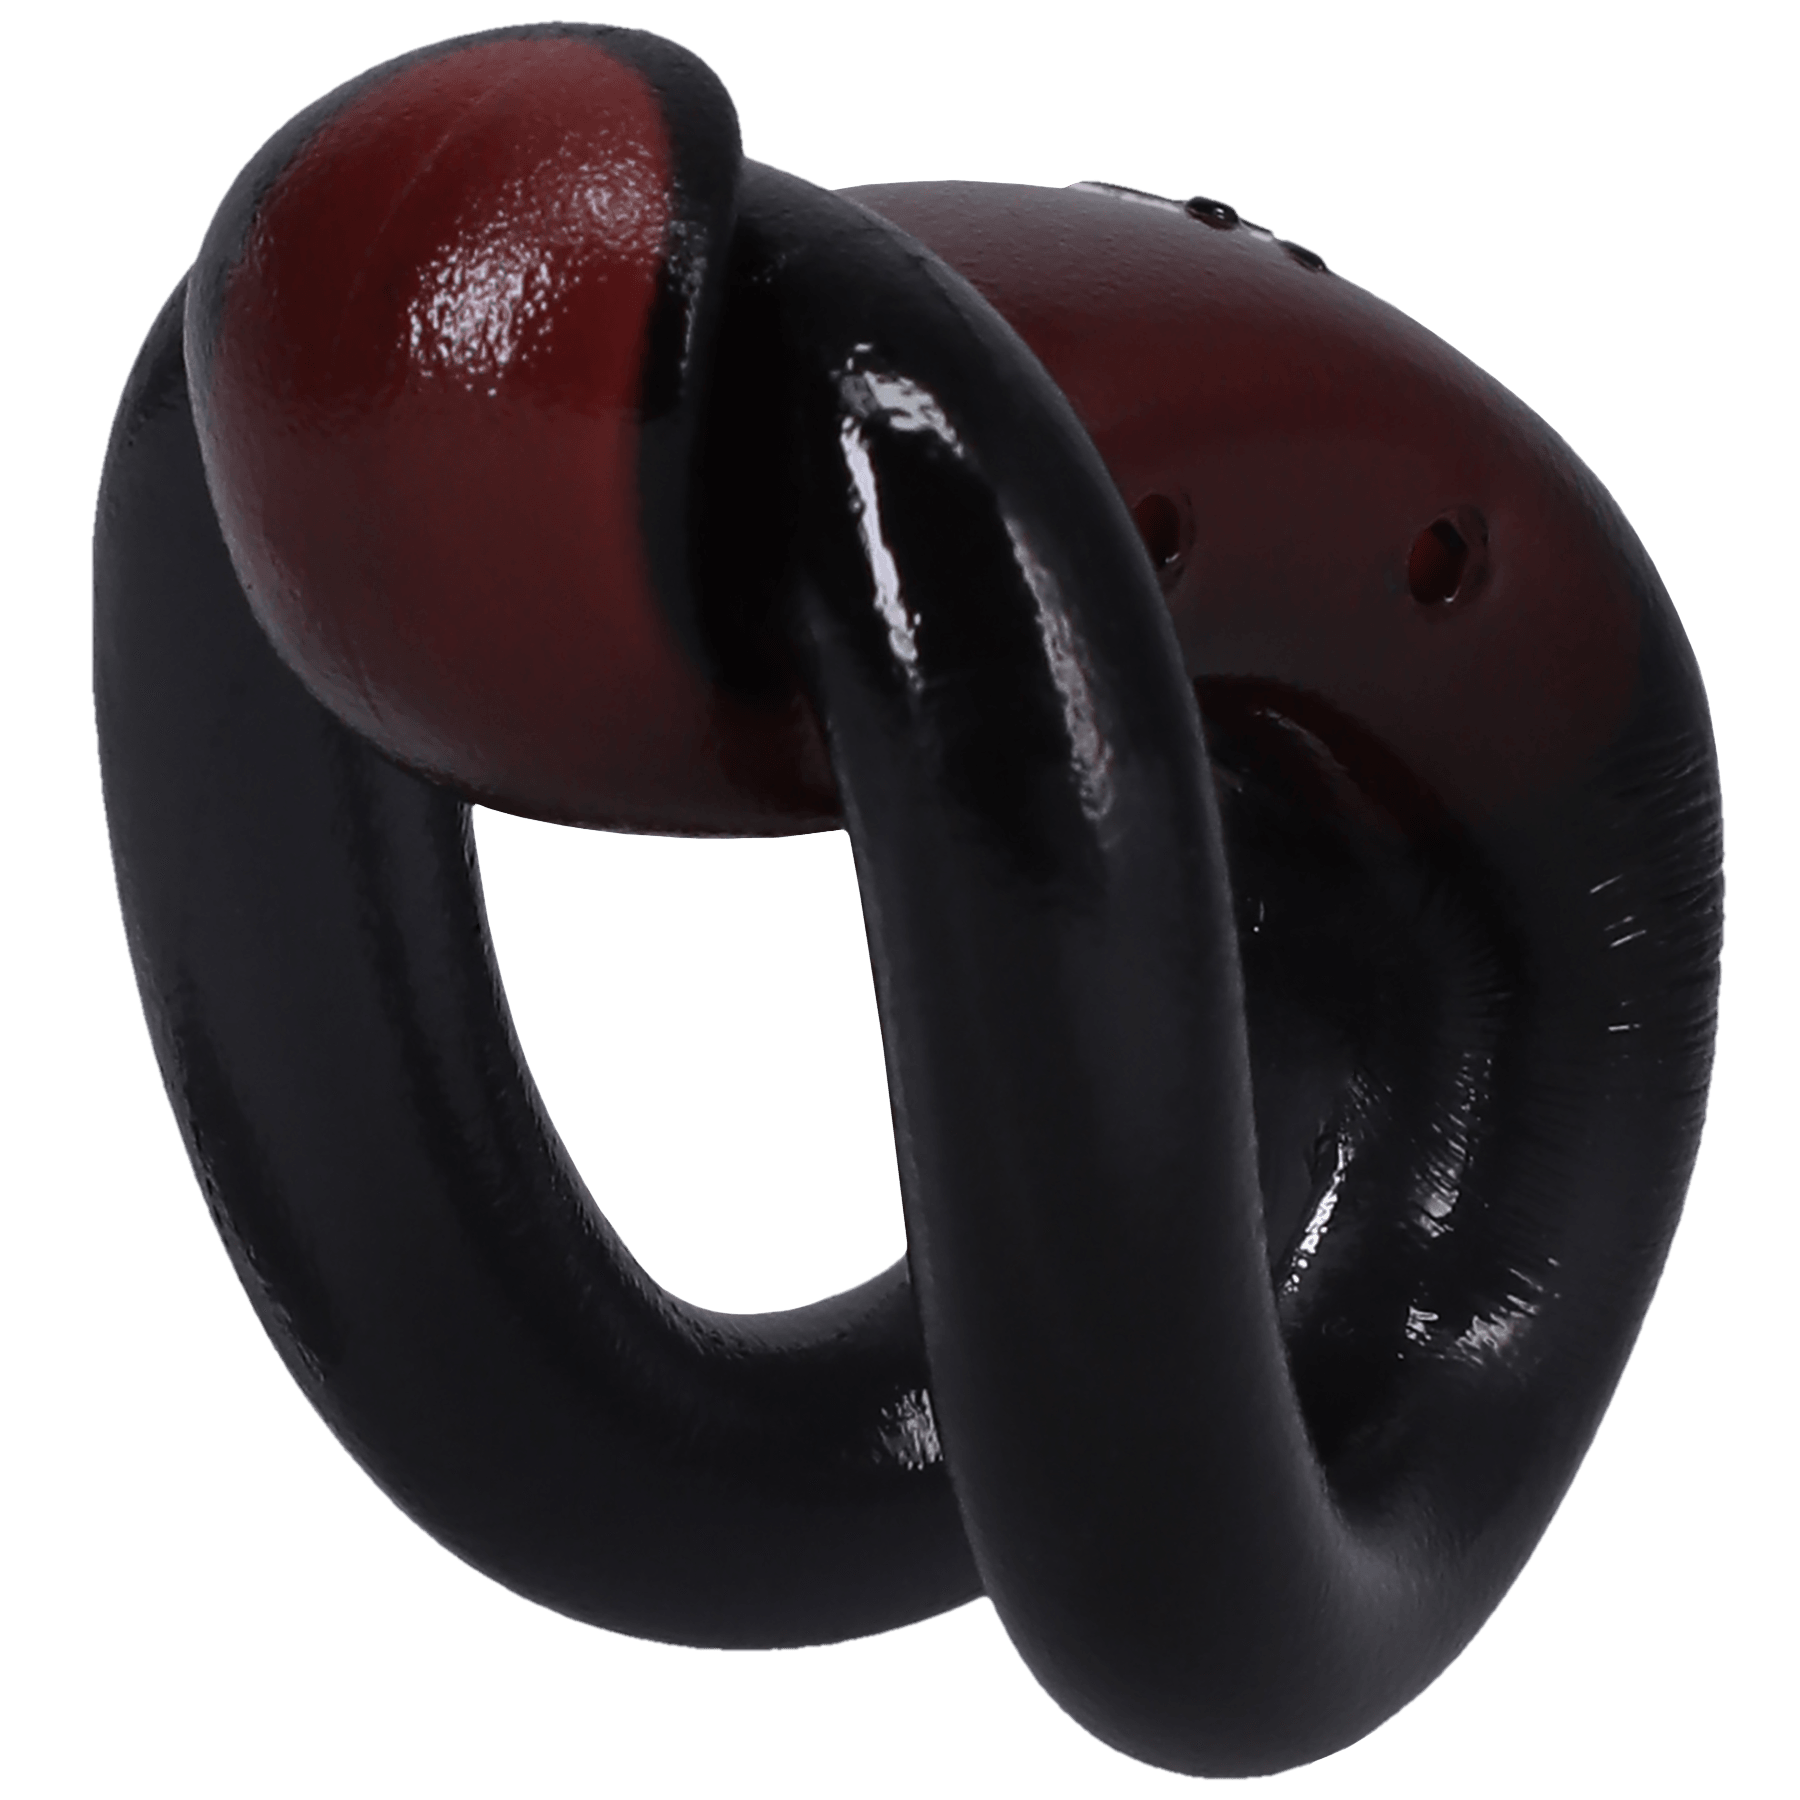 Firmtech Performance Ring - Buy At Luxury Toy X - Free 3-Day Shipping